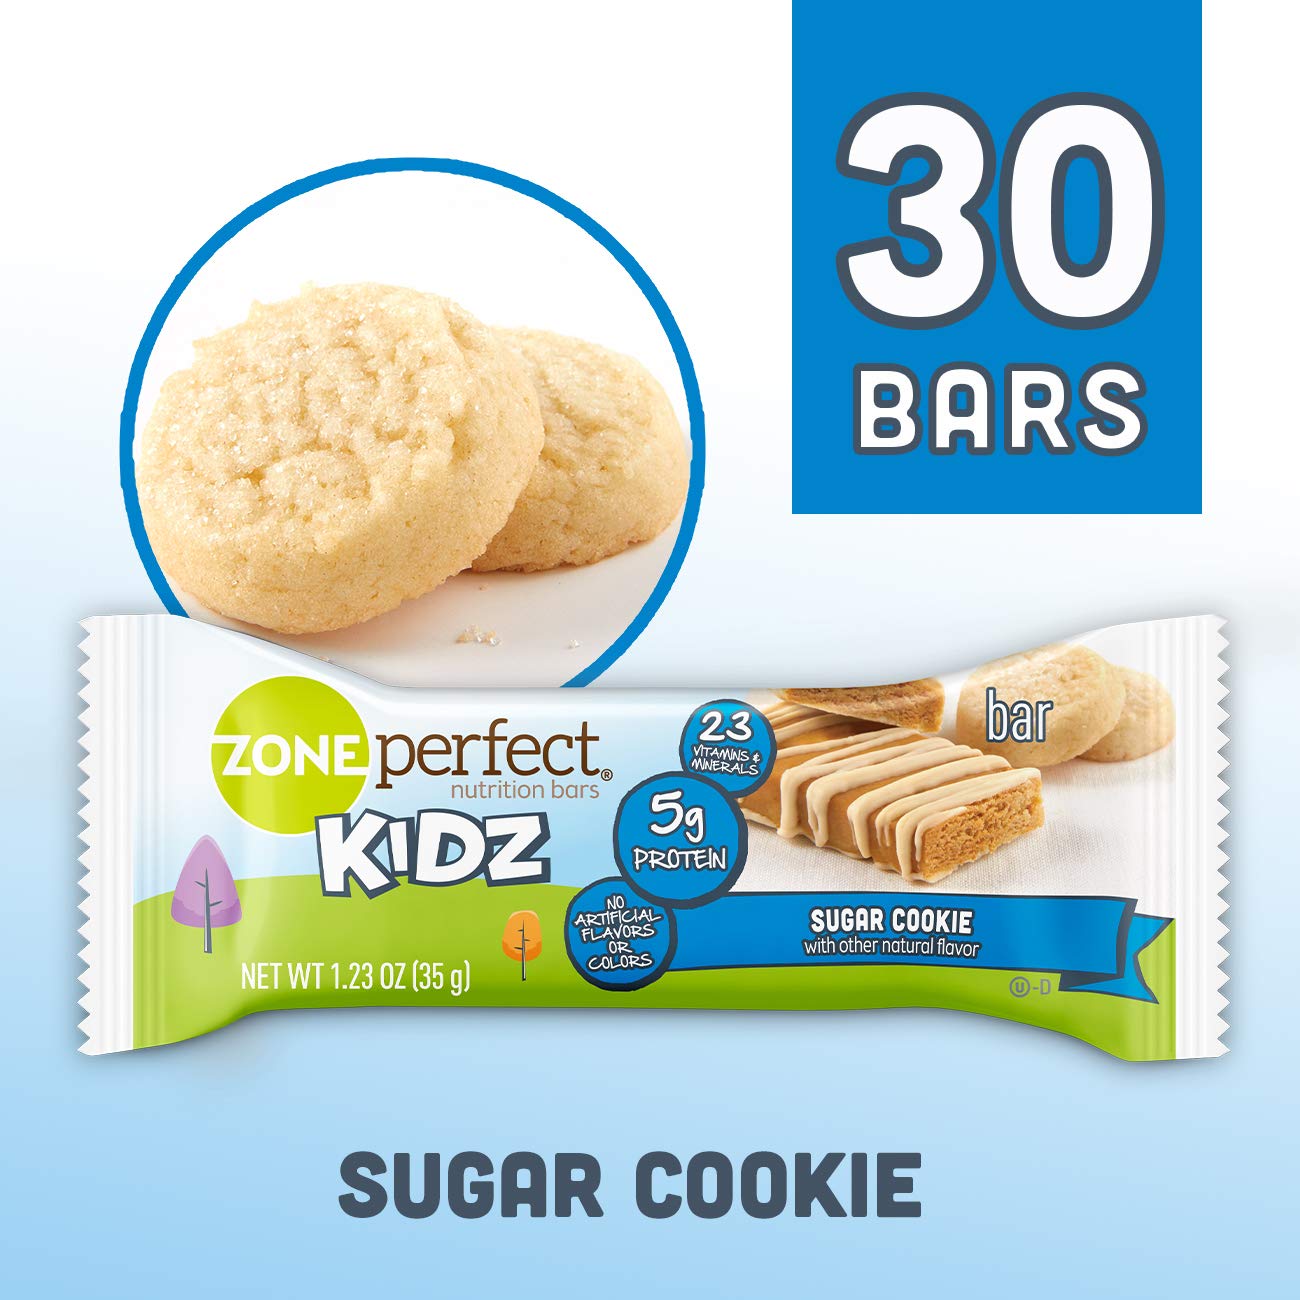 ZonePerfect Kidz Nutrition Bars, No Artificial Flavors or Colors, Sugar Cookie